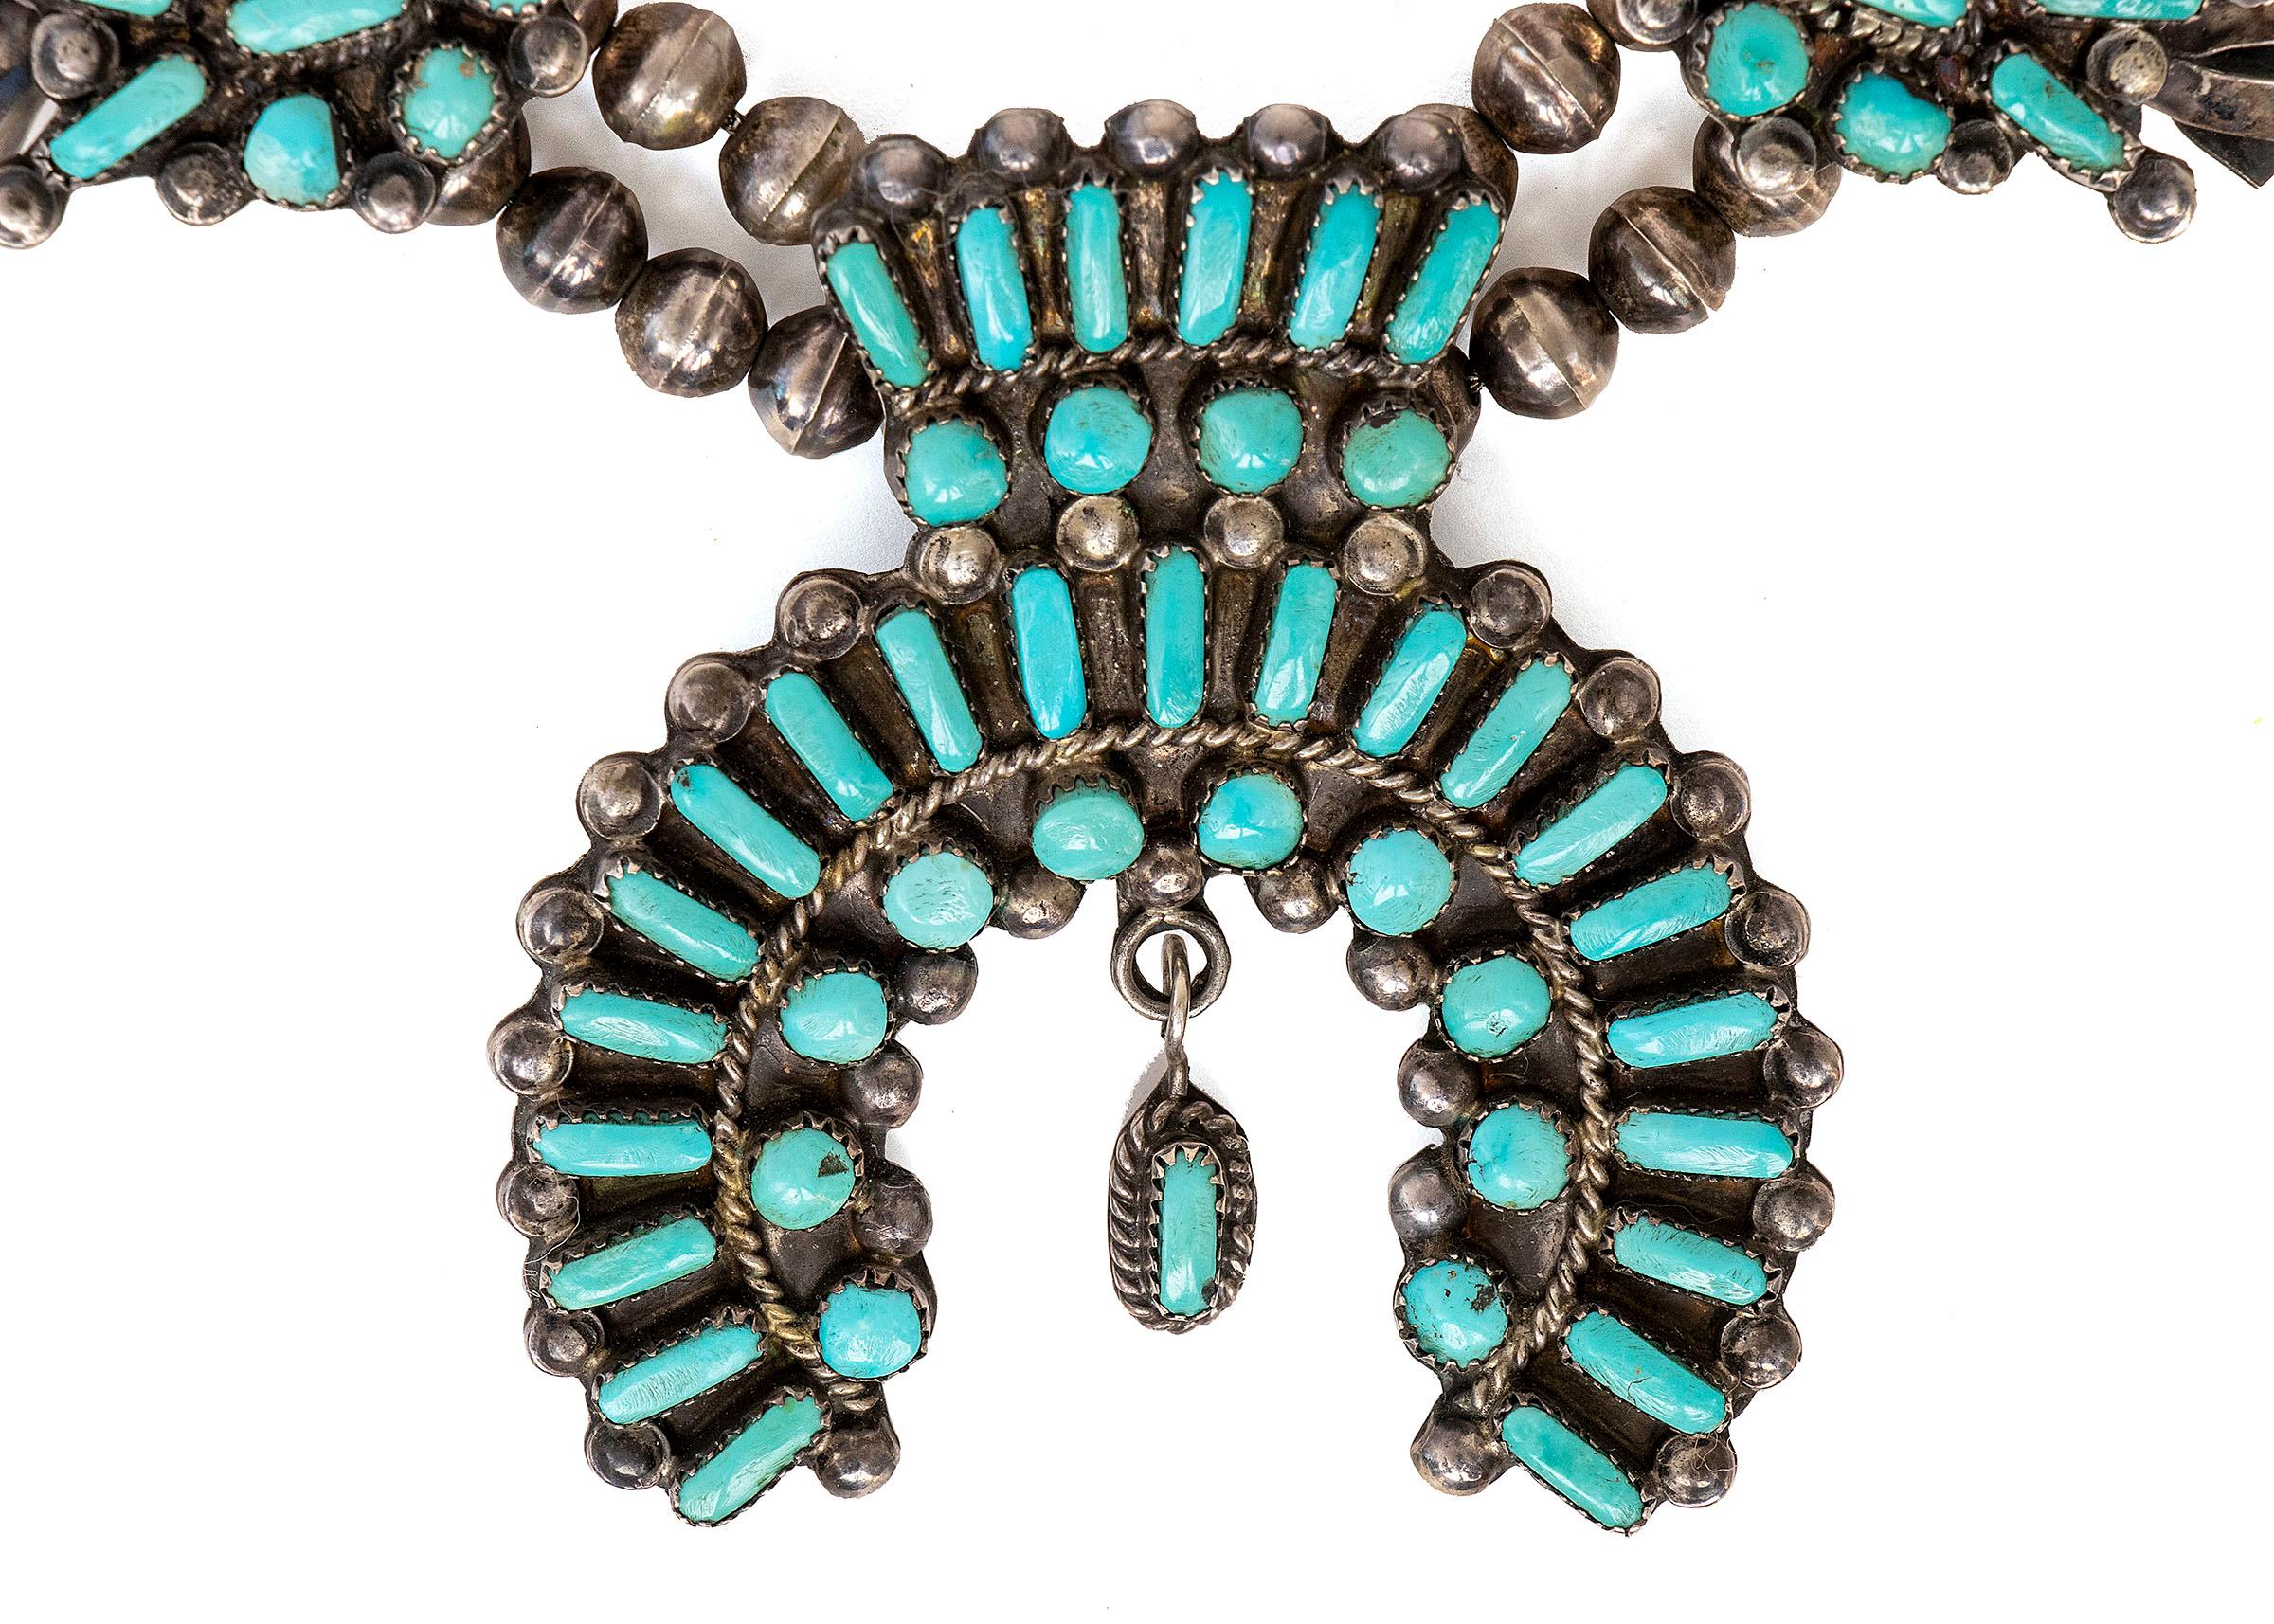 Vintage Zuni Squash Blossom necklace with 12 squash blossoms and a horse shoe Naja. Silver with turquoise stones. Dimensions measure the necklace is 15½ inches in length.

Necklace is clean and in very good vintage condition

Expedited shipping is